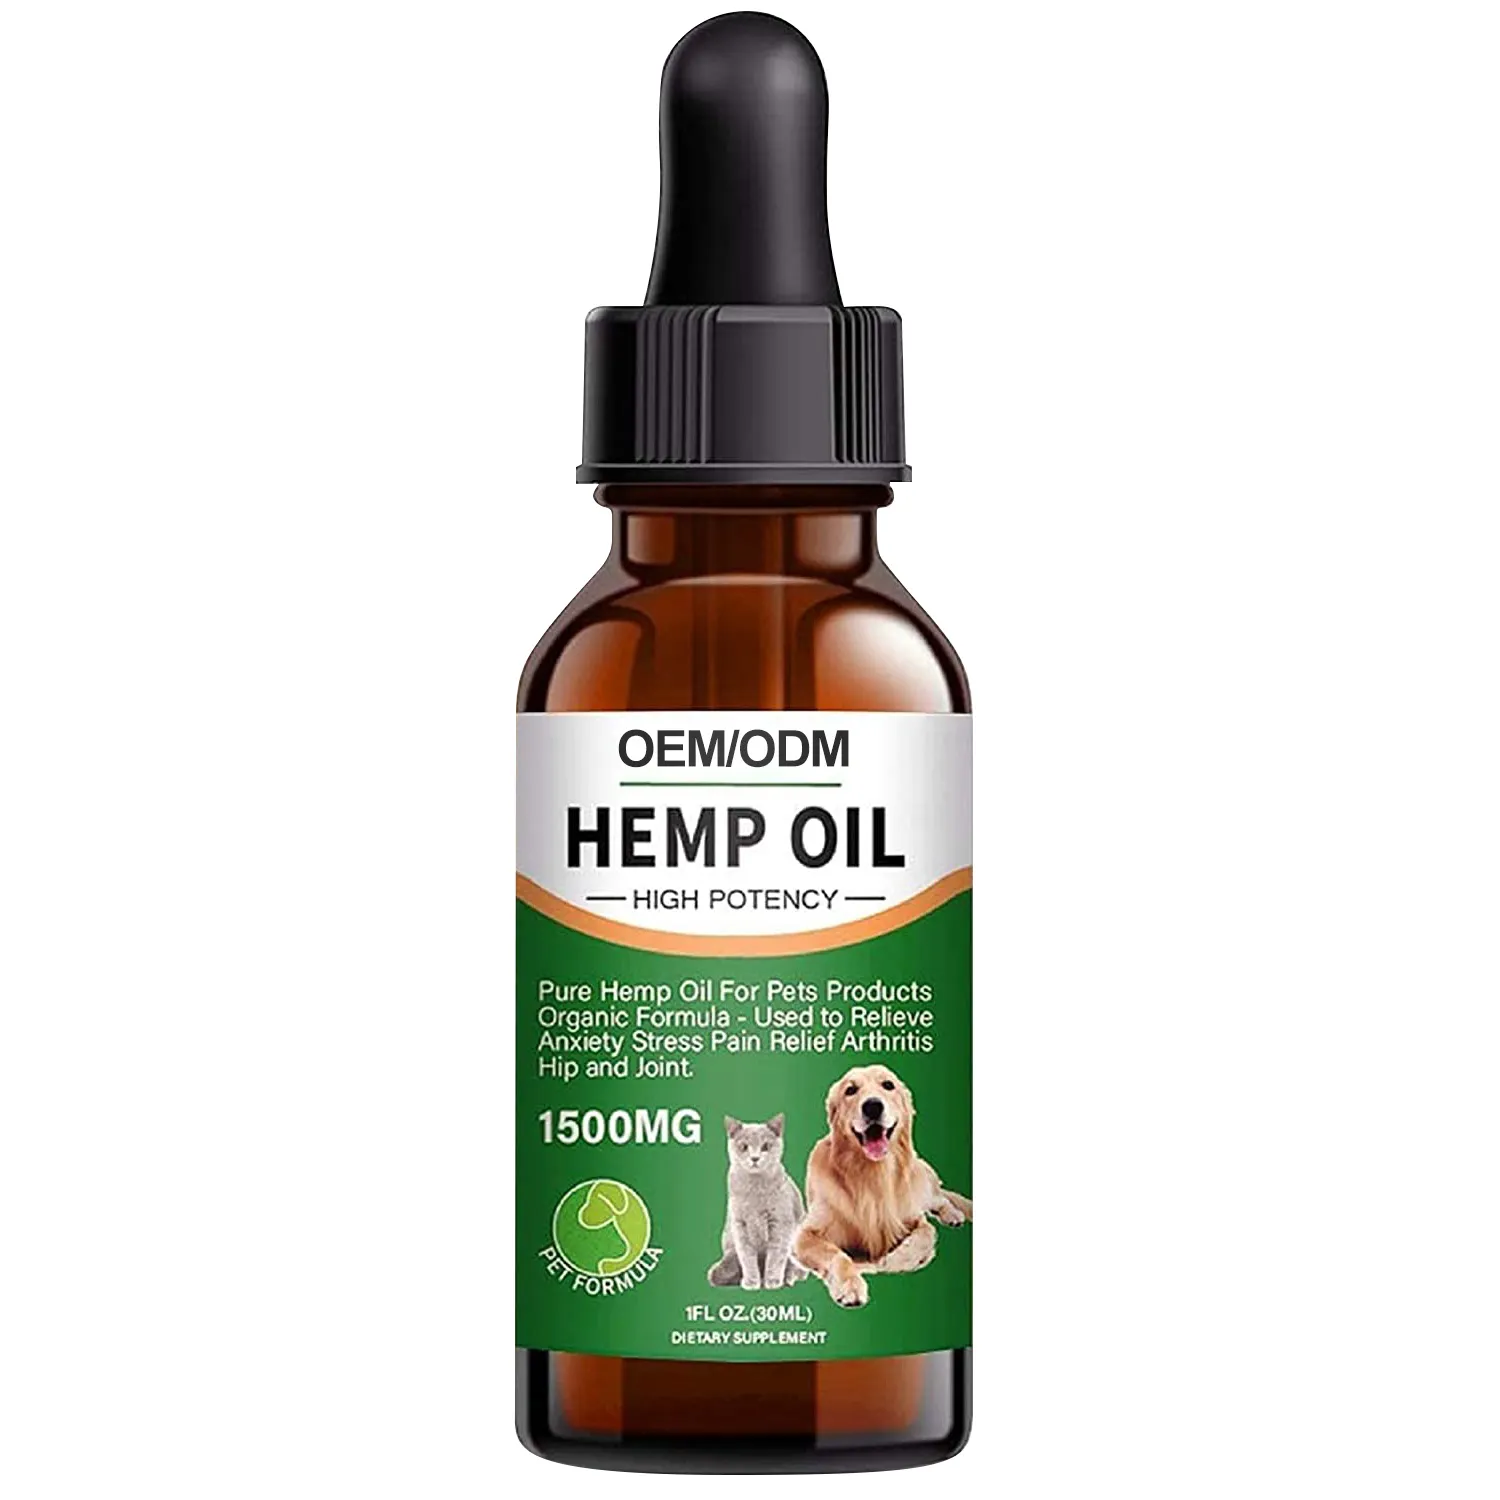 OEM Pure Hemp Seed Oil Private Label for Dogs and Cats Anxiety Relief Good Sleep Bulk Hemp Oil Box HO Oil Plant Extract